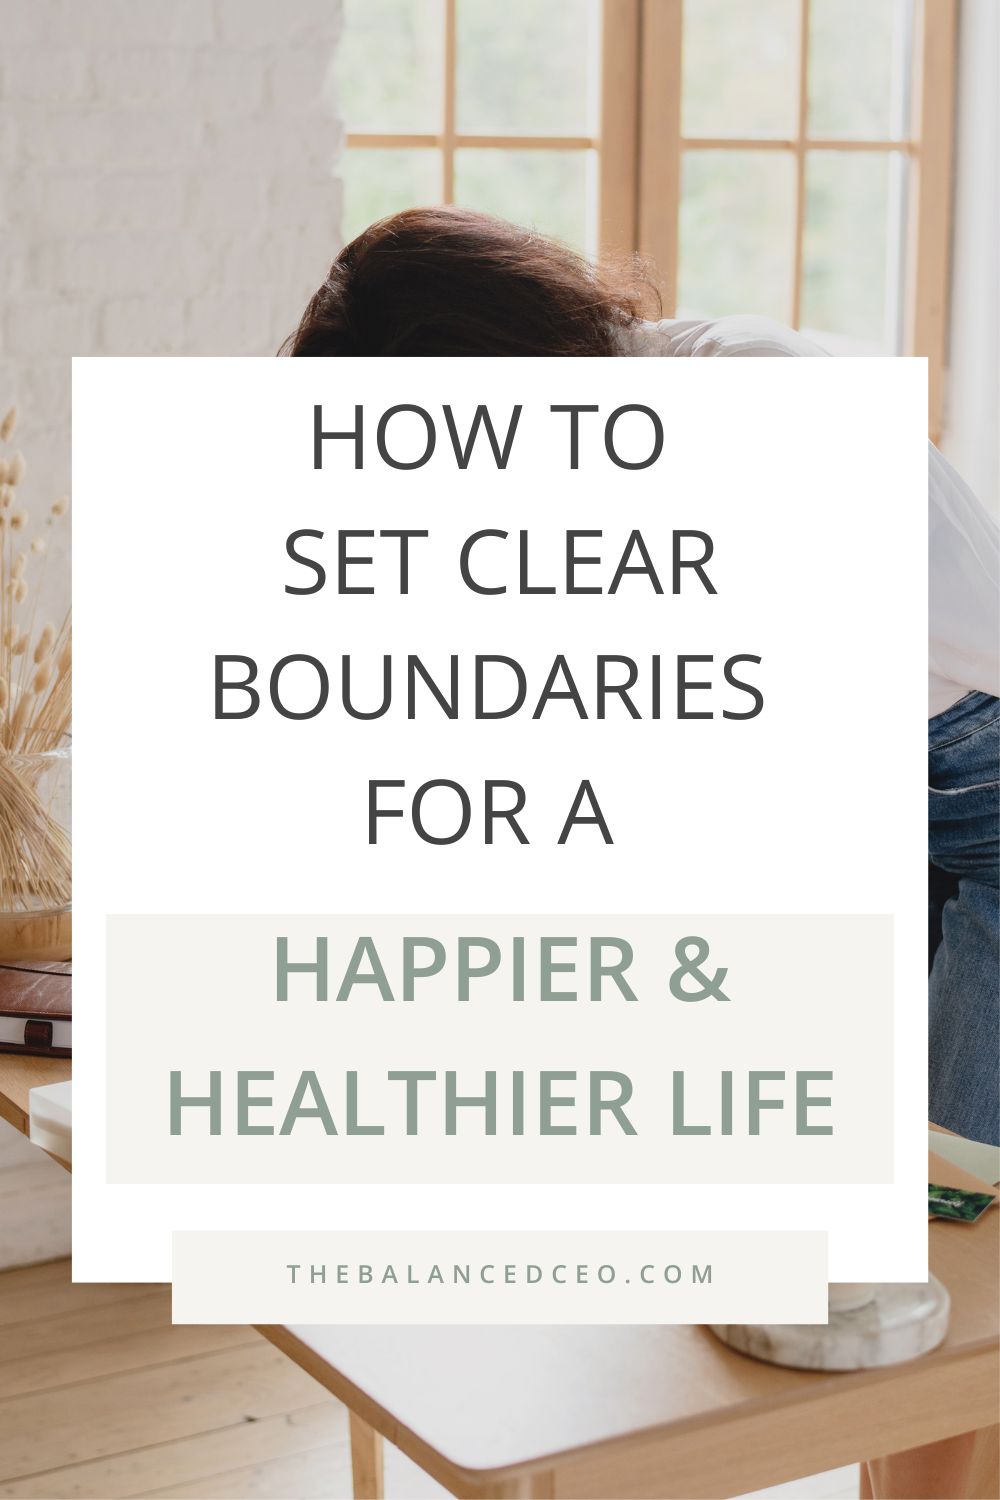 How to Set Clear Boundaries for a Happier and Healthier Life